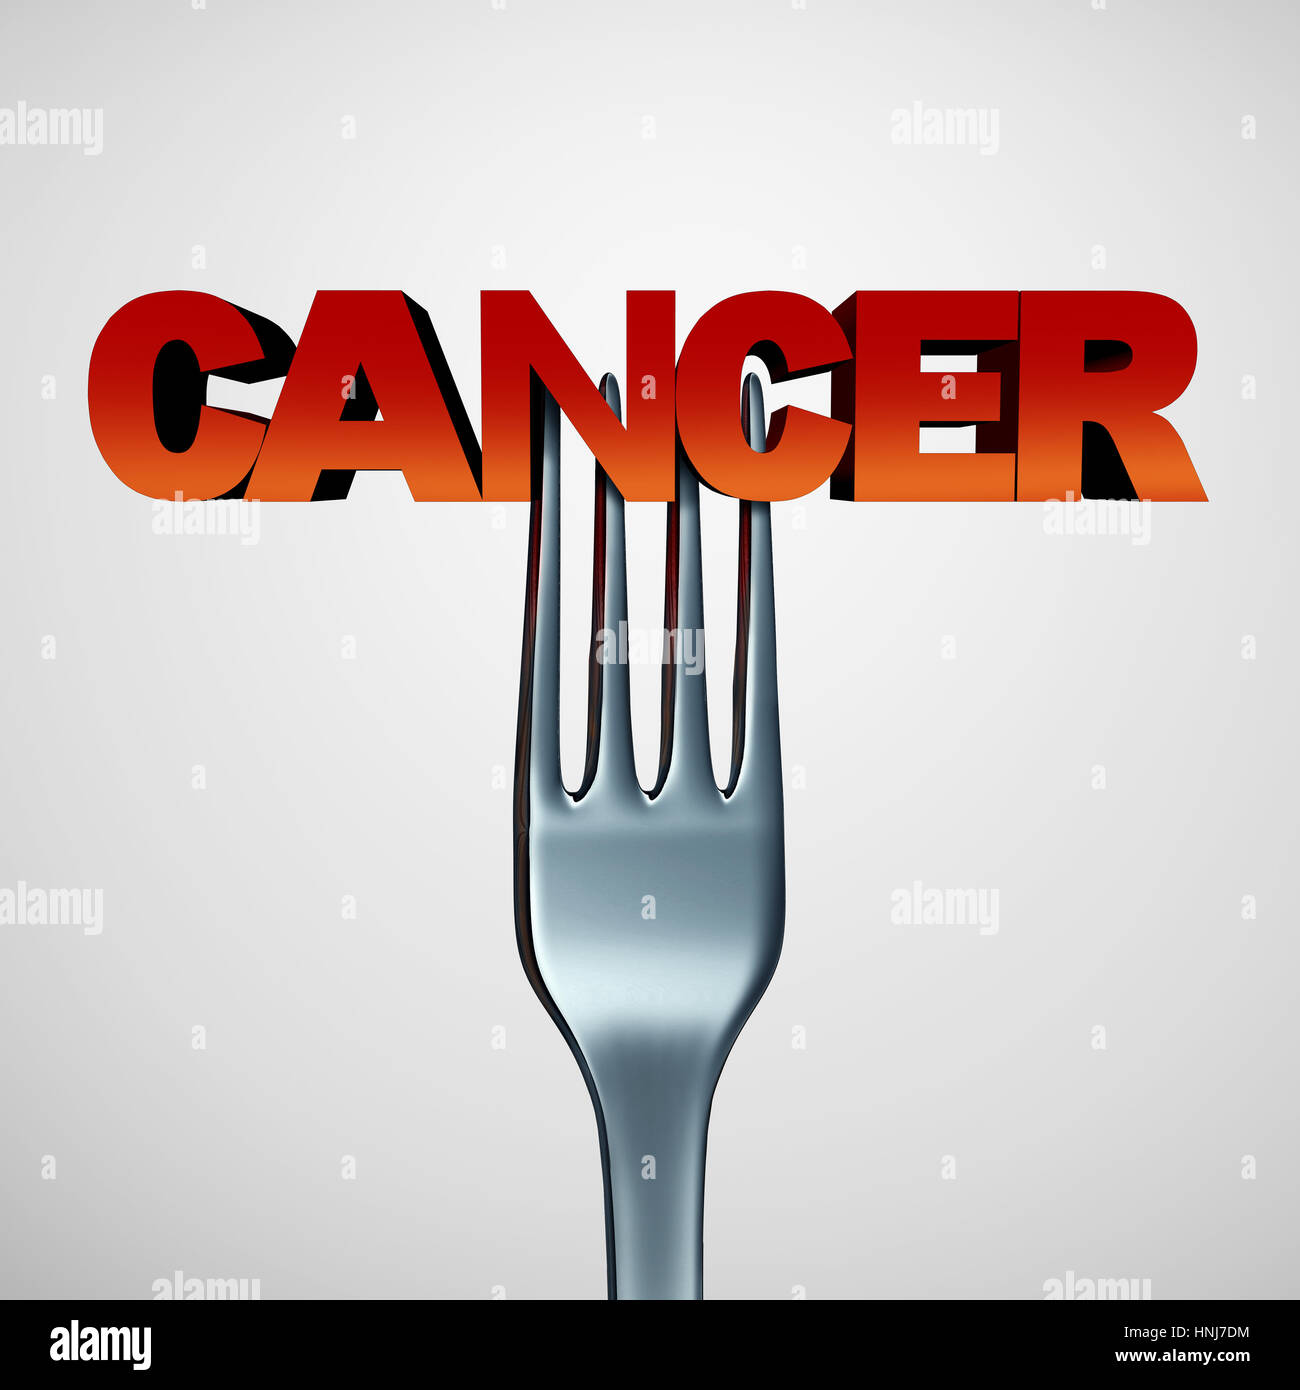 Cancer causing food concept as a medical symbol of the dangers of eating certain carcinogenic meals or eating ingredients. Stock Photo